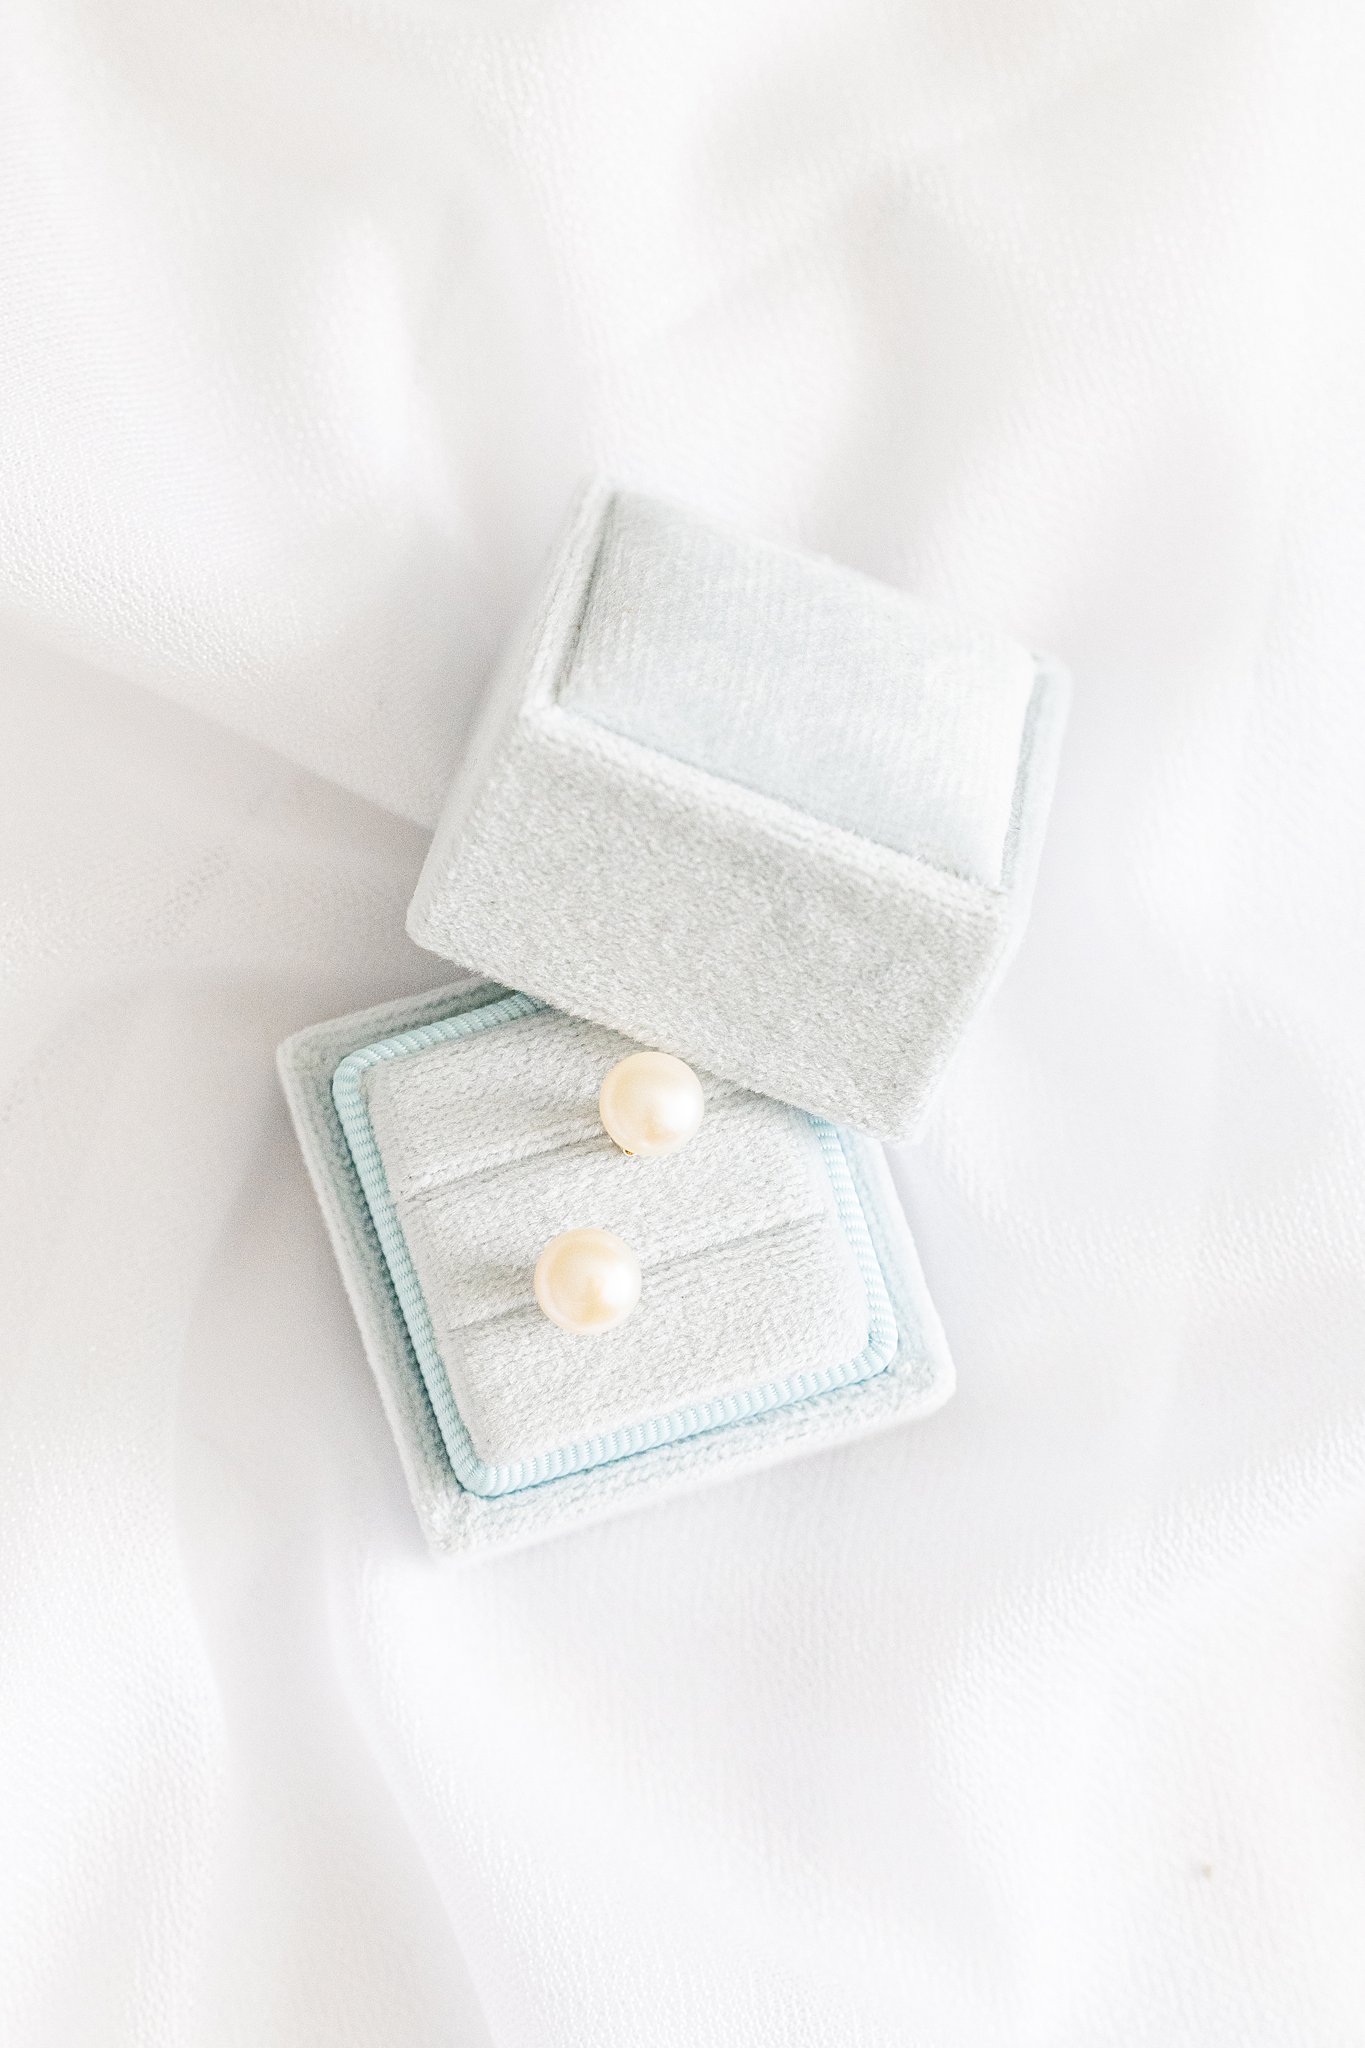 A pair of pearl earrings sit in their jewelry box on a white fabric virginia wedding planner